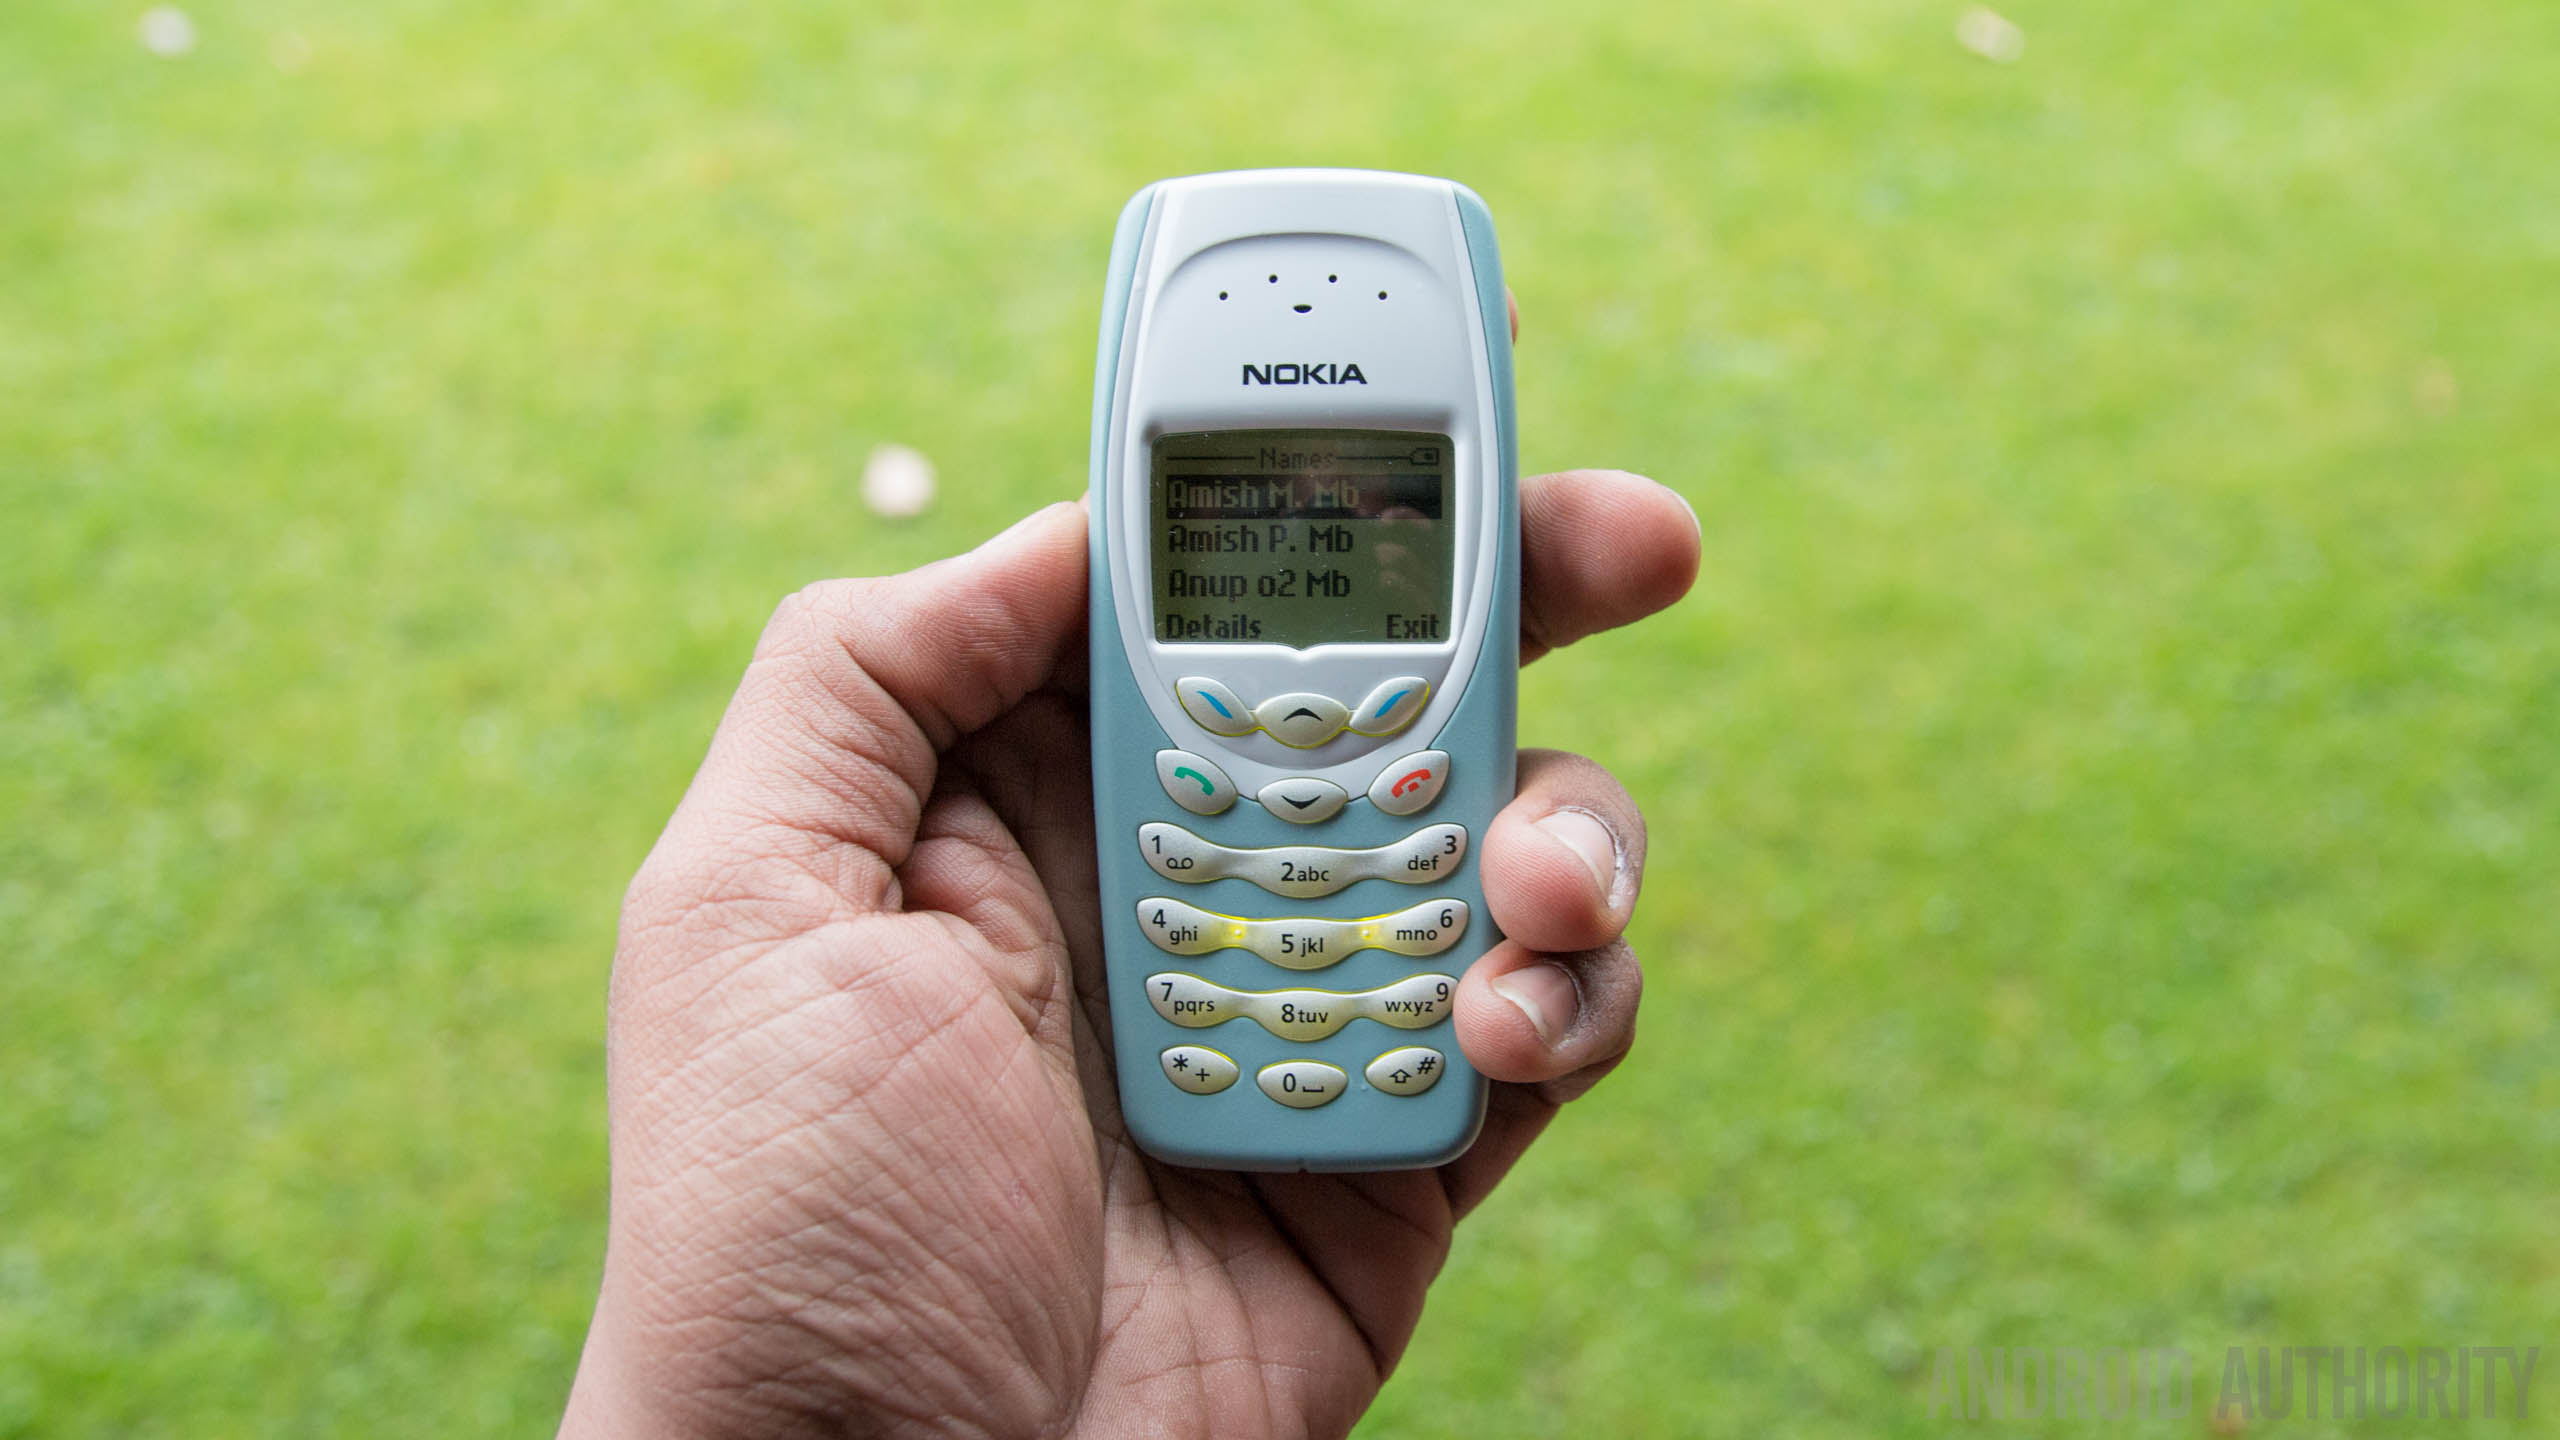 Nostalgia is great, but not necessarily enough to make Nokia a success again.